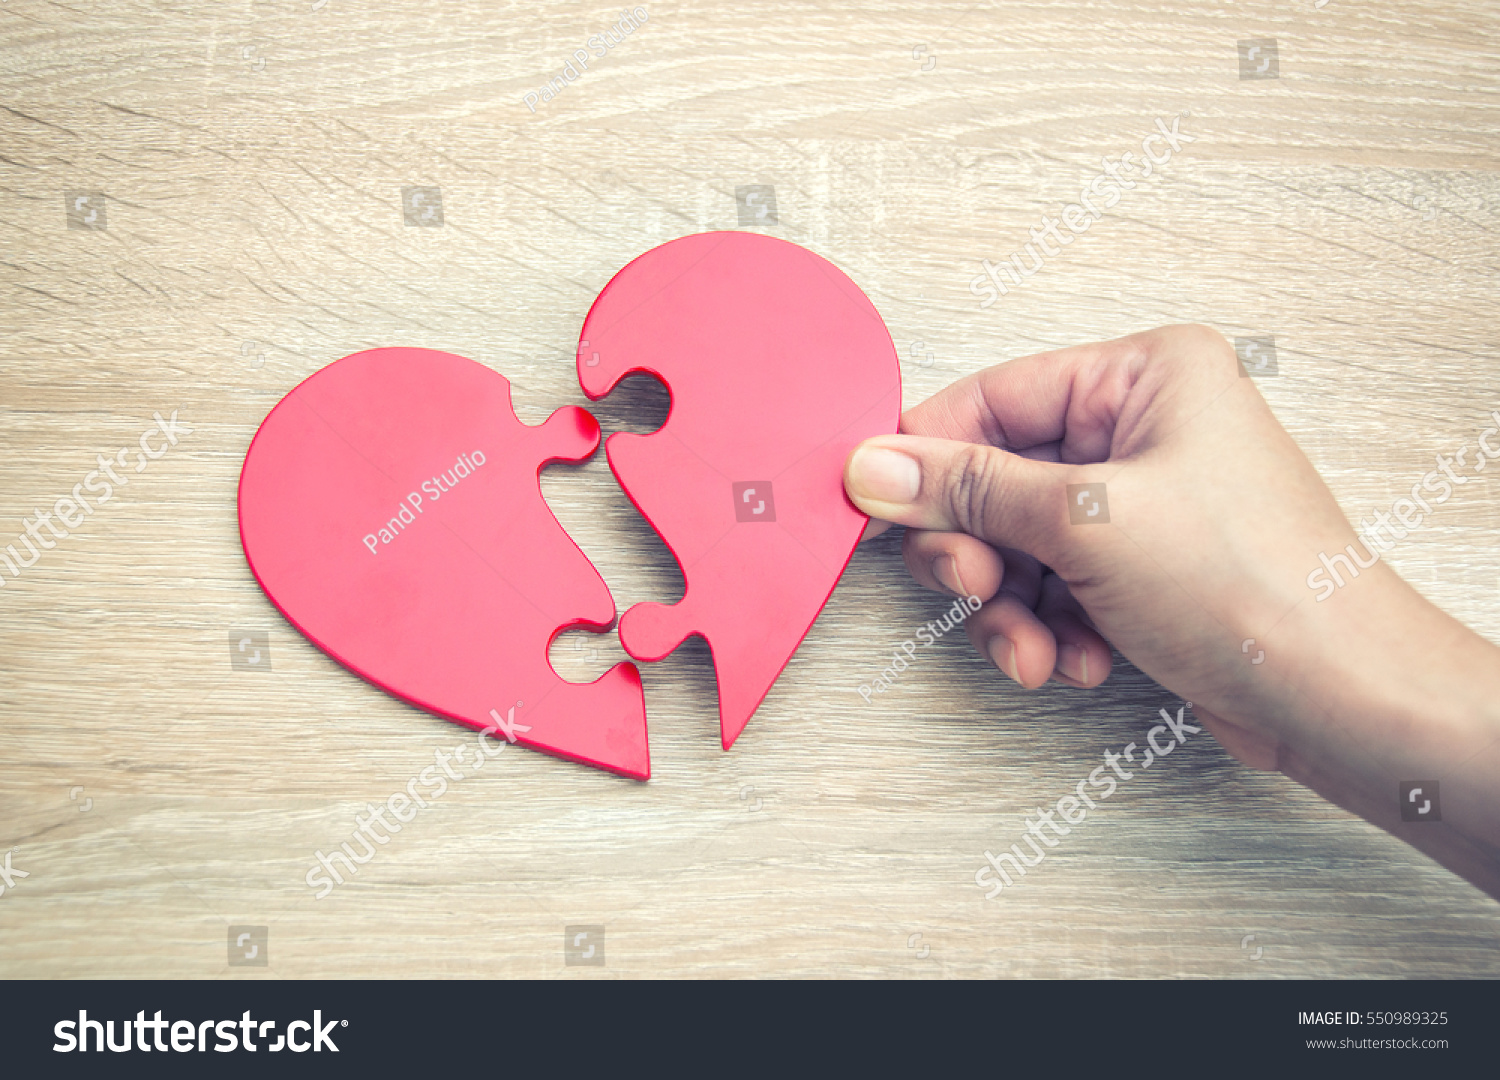 female hand matching red jigsaw heart halves on grey wooden background #550989325